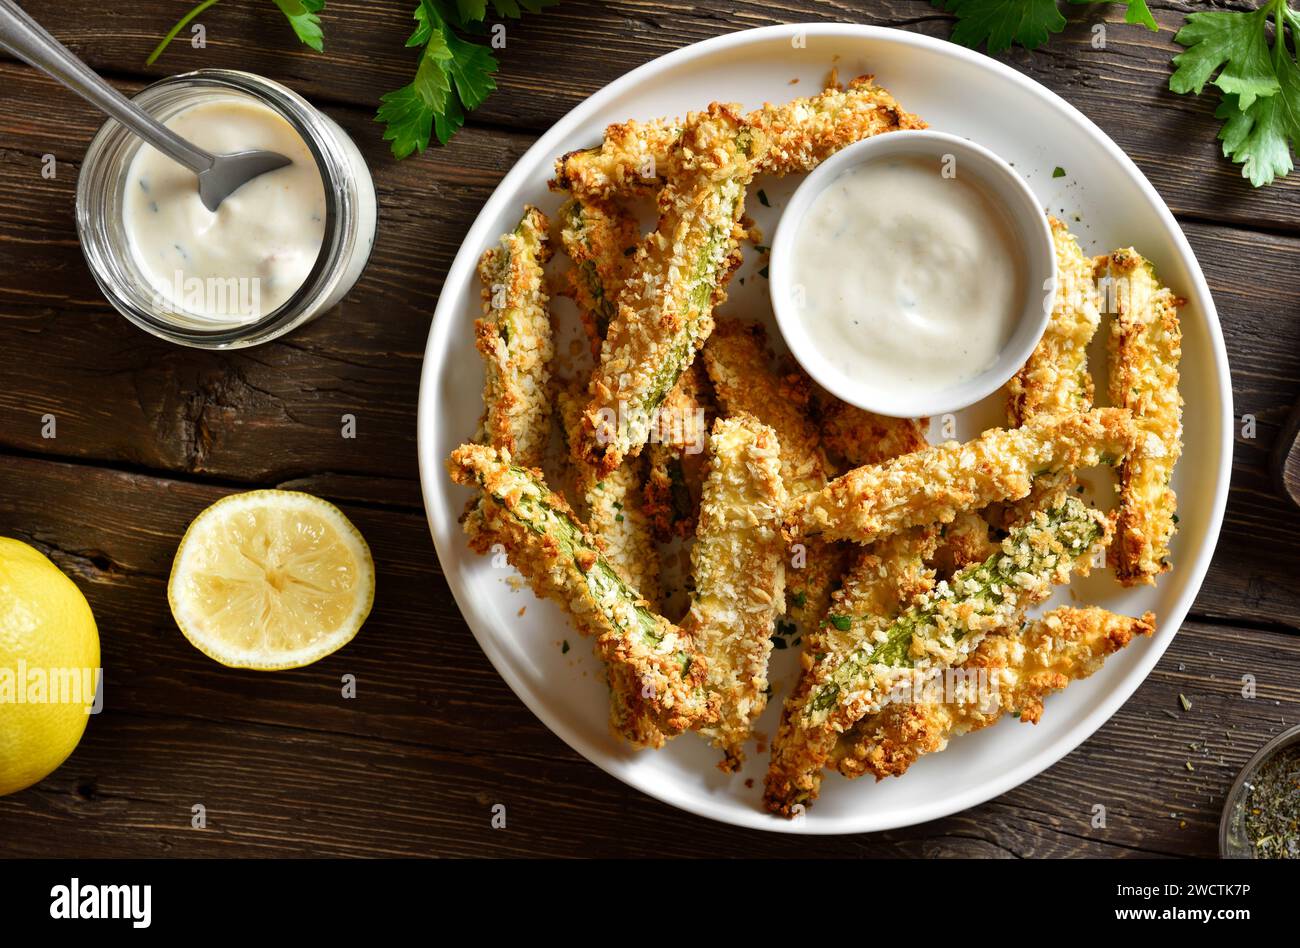 Crunchy zucchini breaded sticks with dip sauce on plate over wooden background. Top view, flat lay Stock Photo